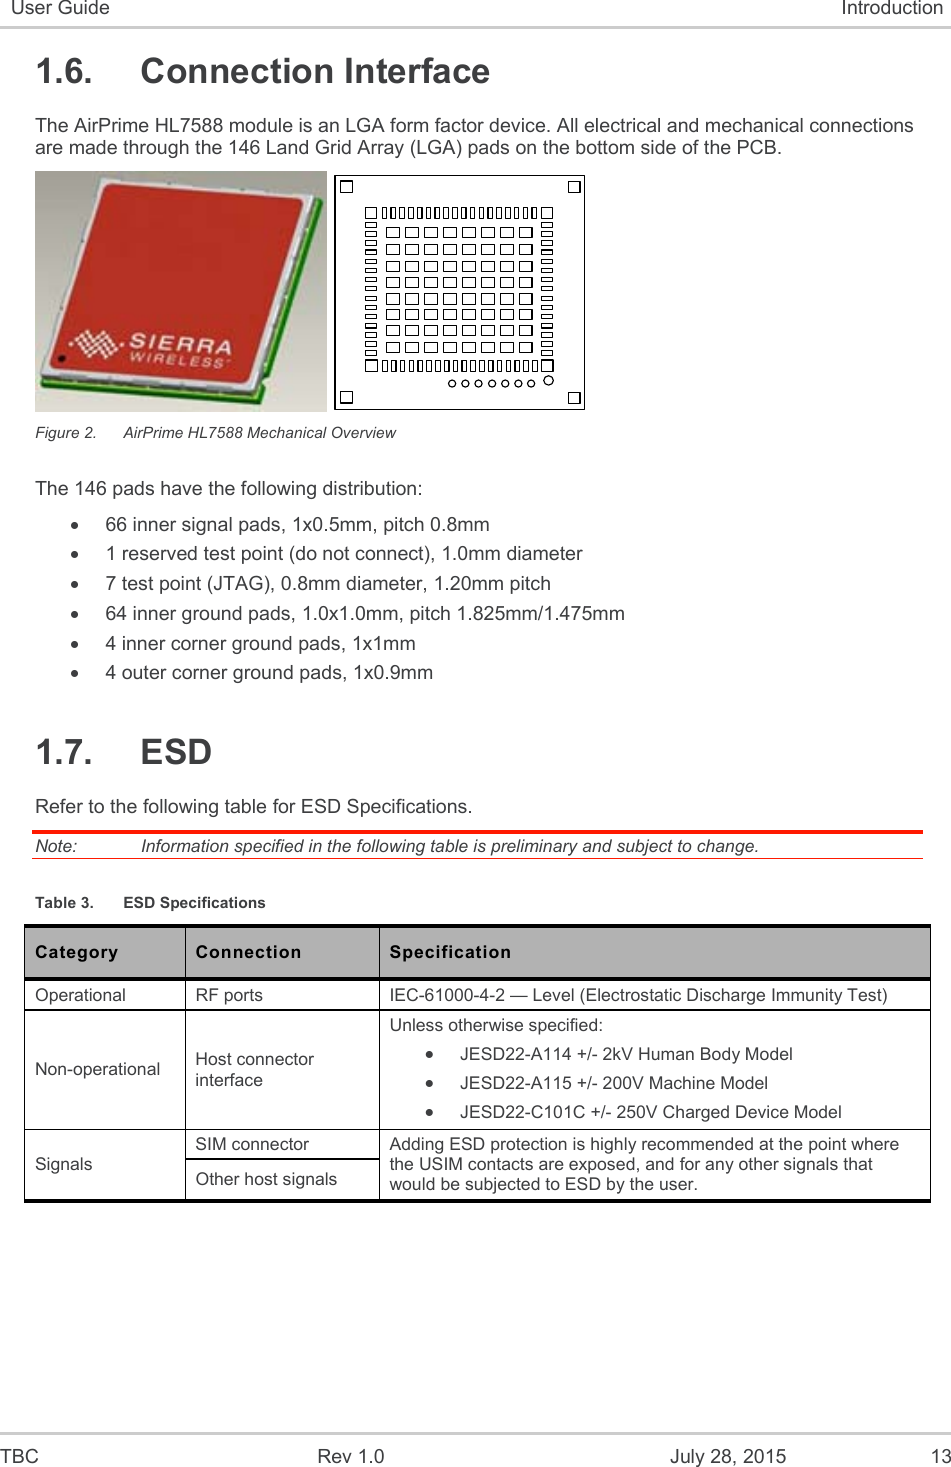  TBC  Rev 1.0  July 28, 2015  13 User Guide  Introduction 1.6.  Connection Interface The AirPrime HL7588 module is an LGA form factor device. All electrical and mechanical connections are made through the 146 Land Grid Array (LGA) pads on the bottom side of the PCB.   Figure 2.  AirPrime HL7588 Mechanical Overview The 146 pads have the following distribution:   66 inner signal pads, 1x0.5mm, pitch 0.8mm   1 reserved test point (do not connect), 1.0mm diameter   7 test point (JTAG), 0.8mm diameter, 1.20mm pitch   64 inner ground pads, 1.0x1.0mm, pitch 1.825mm/1.475mm   4 inner corner ground pads, 1x1mm   4 outer corner ground pads, 1x0.9mm 1.7.  ESD Refer to the following table for ESD Specifications. Note:   Information specified in the following table is preliminary and subject to change. Table 3.  ESD Specifications Category  Connection  Specification Operational  RF ports  IEC-61000-4-2 — Level (Electrostatic Discharge Immunity Test) Non-operational  Host connector interface Unless otherwise specified:  JESD22-A114 +/- 2kV Human Body Model  JESD22-A115 +/- 200V Machine Model  JESD22-C101C +/- 250V Charged Device Model Signals SIM connector  Adding ESD protection is highly recommended at the point where the USIM contacts are exposed, and for any other signals that would be subjected to ESD by the user. Other host signals 